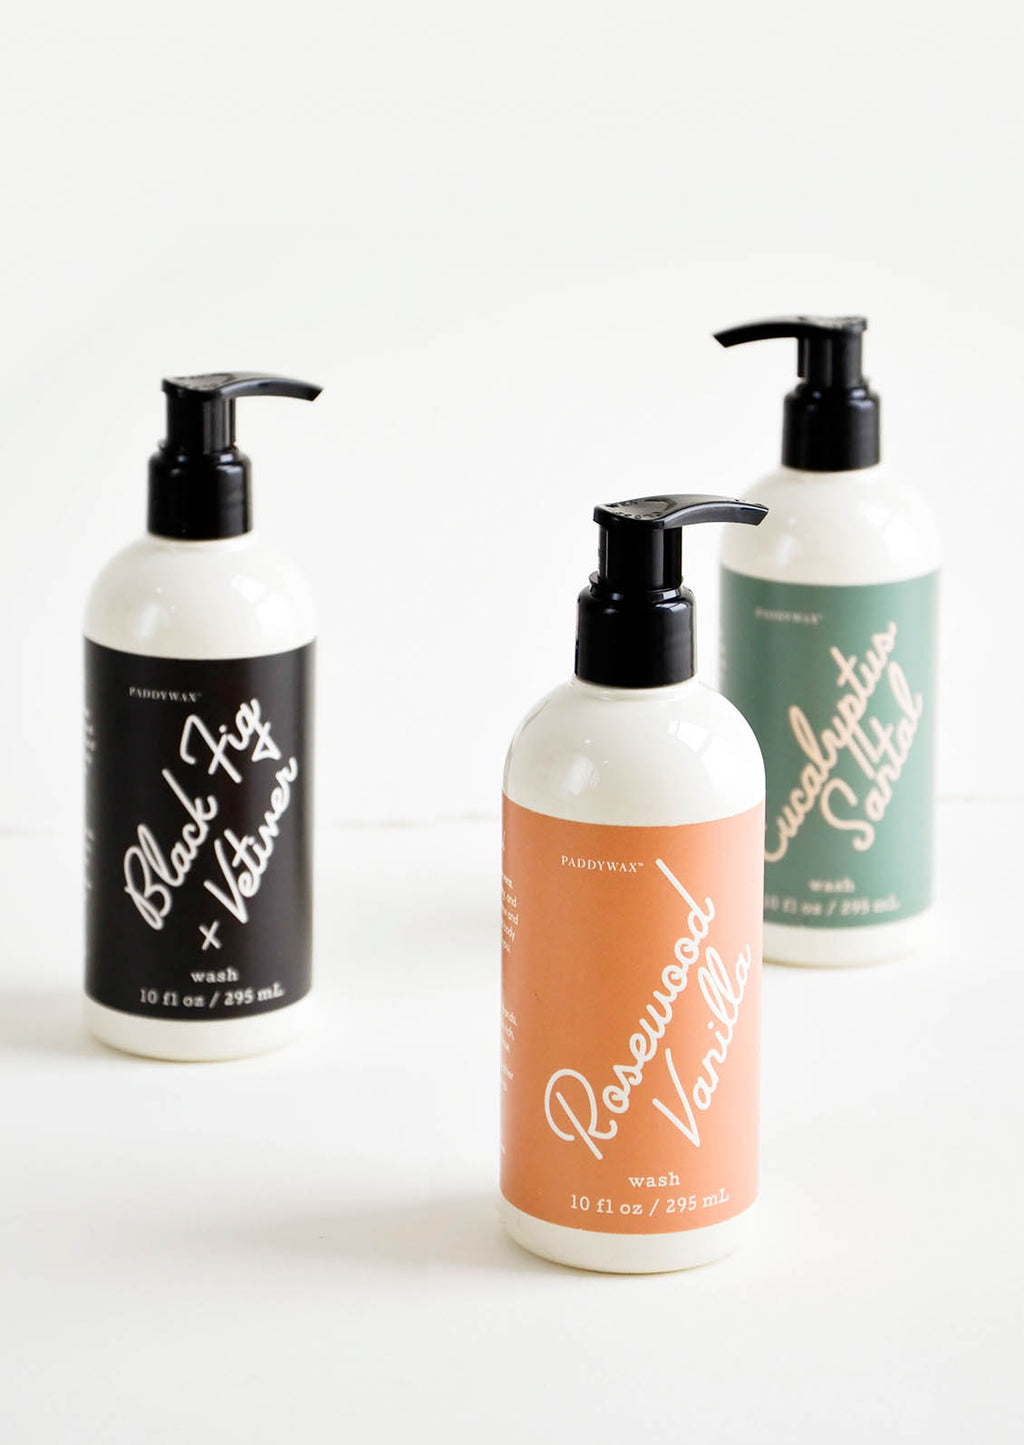 2: Liquid soap packaged in ivory and black pump bottles with modern label design